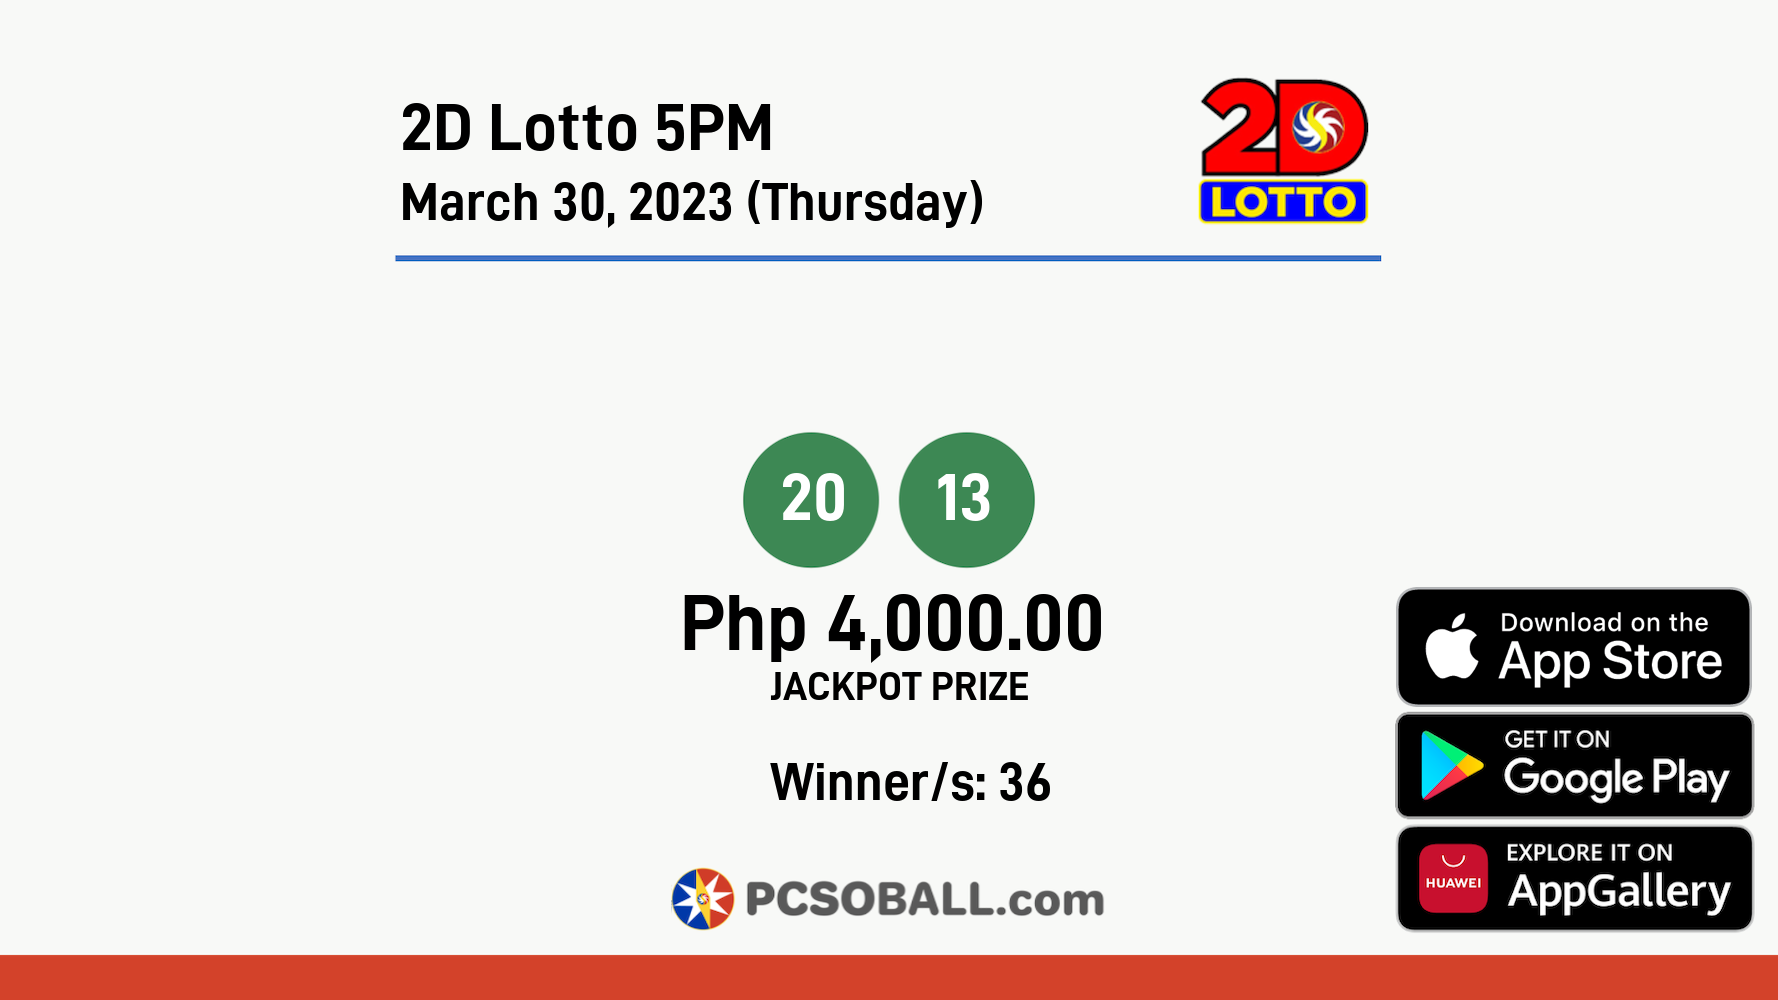 2D Lotto 5PM March 30, 2023 (Thursday) Result